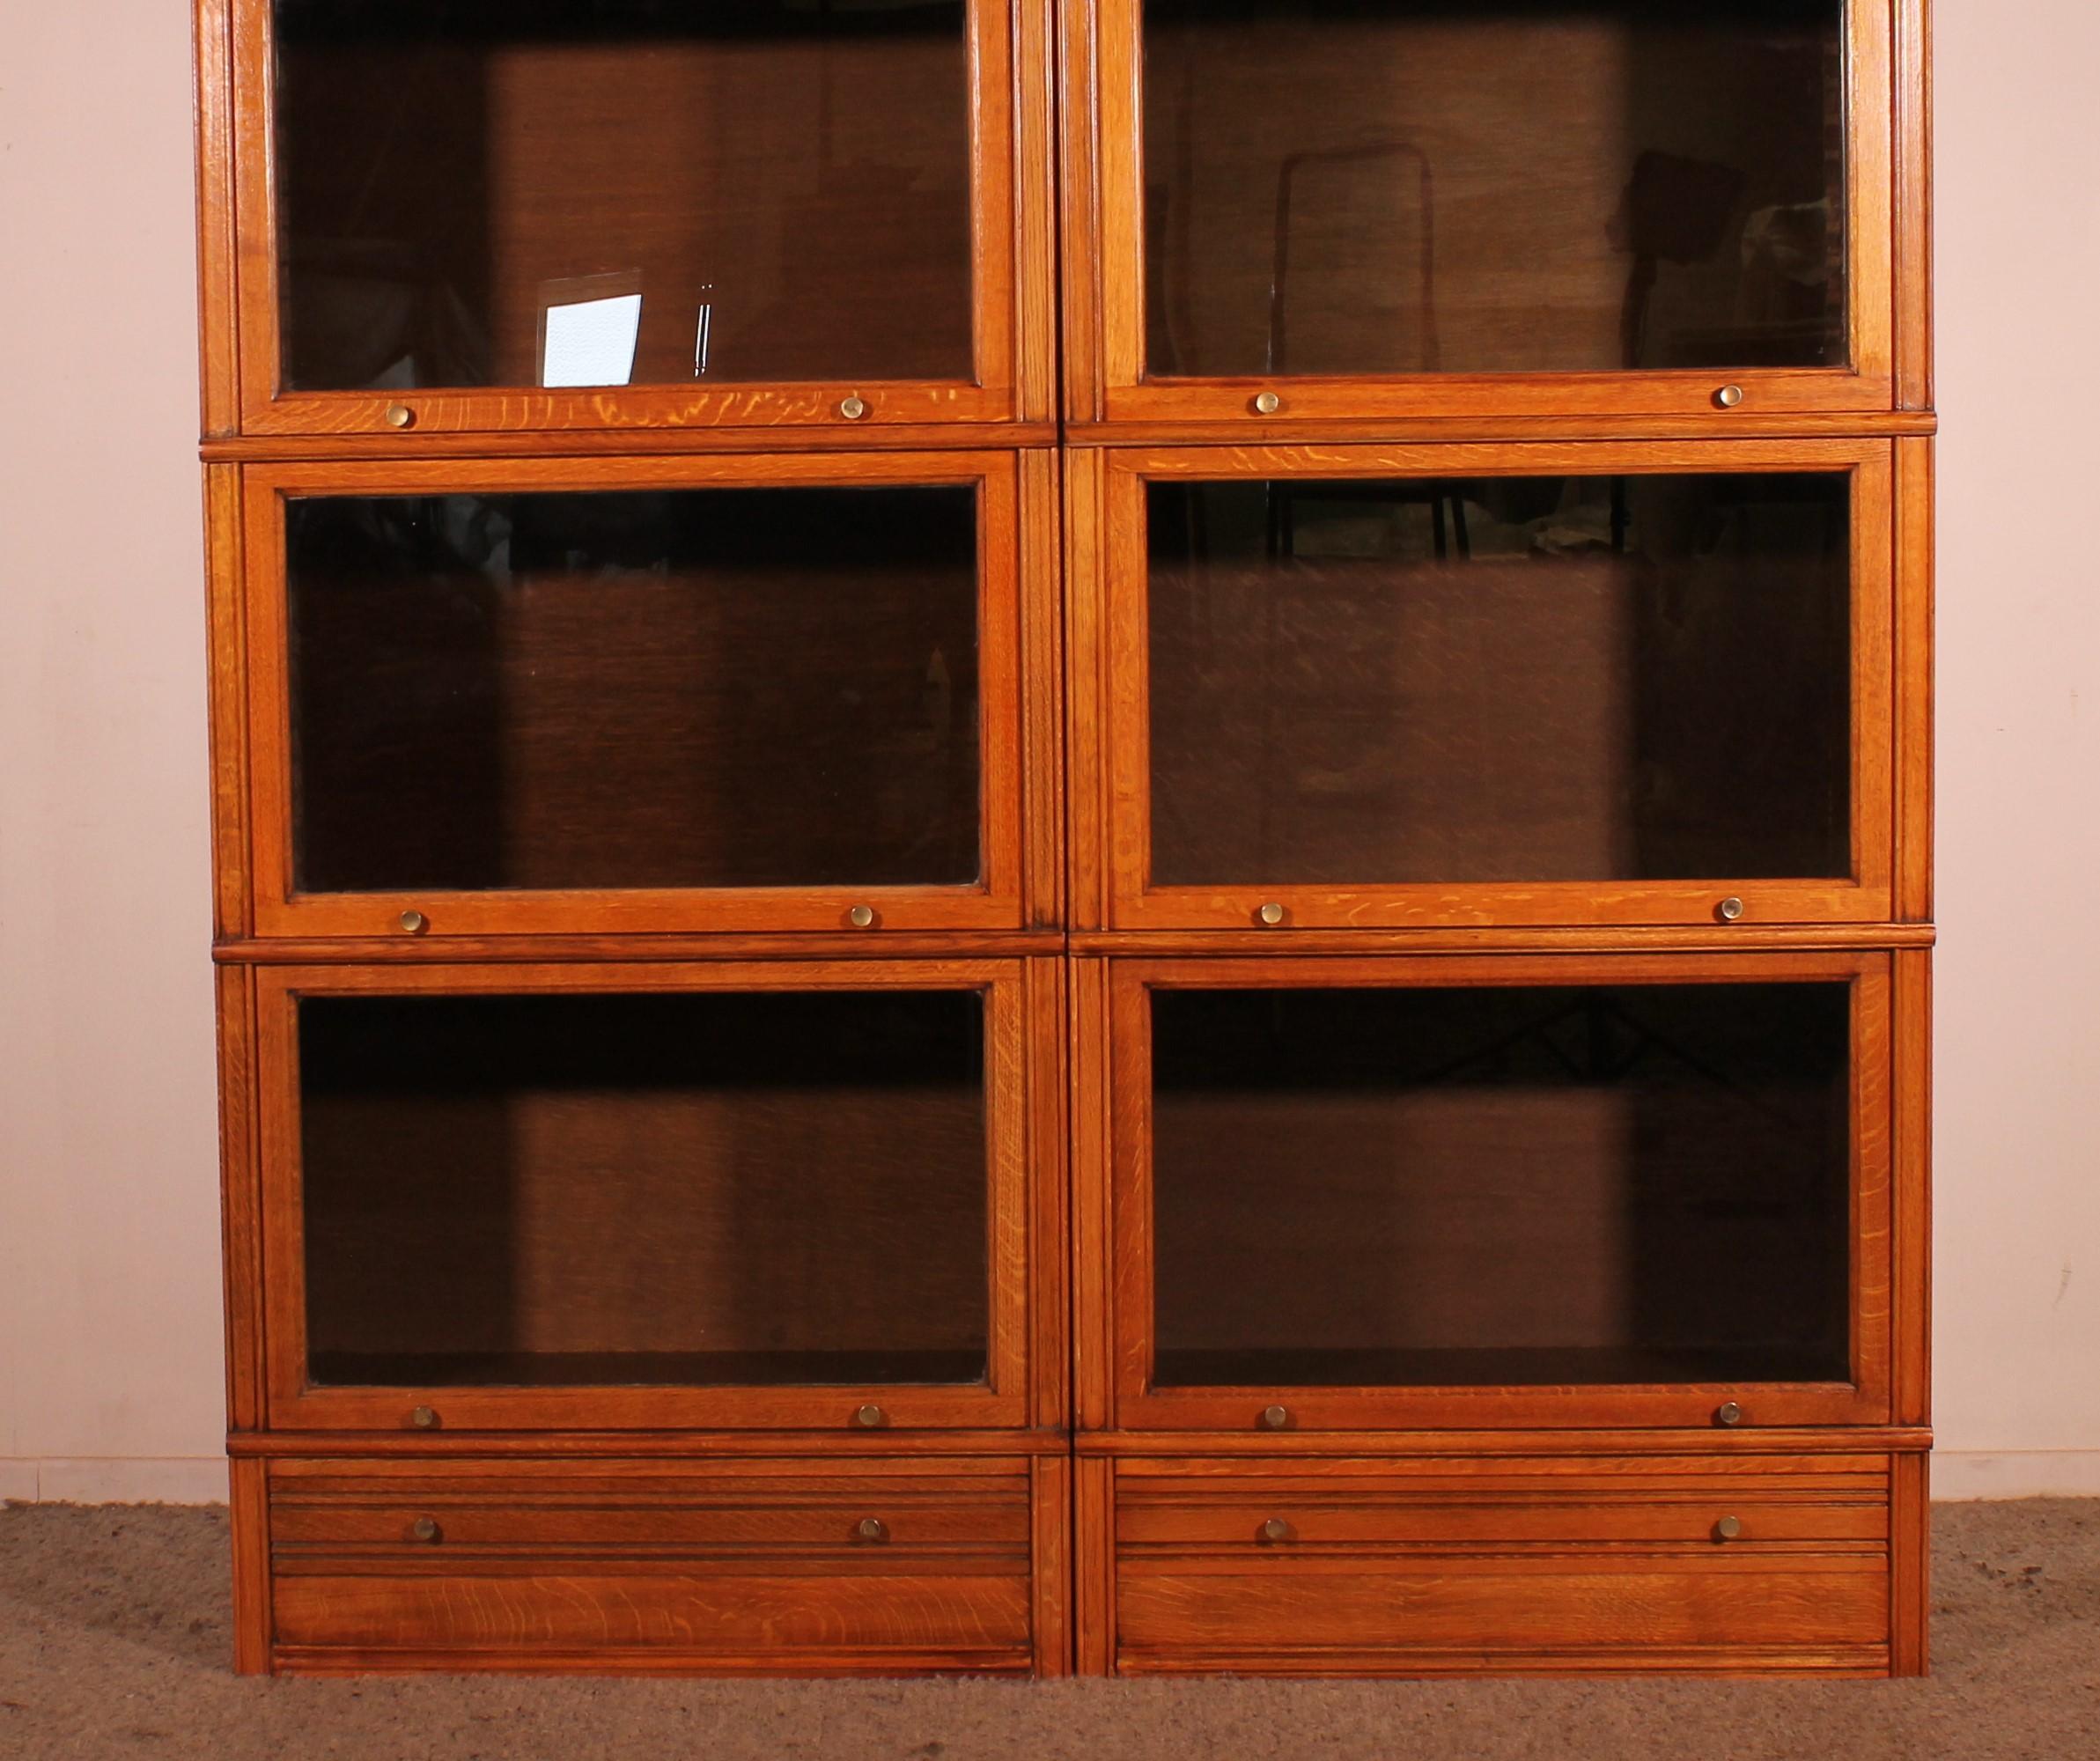 Elegant pair of largestacking bookcases from MD in light oak from the 60s.

Very beautiful pair composed of 4 glazed elements and a drawer in the base.

The bookcases have large elements which allows you to put A4 binders, clothes or large books and